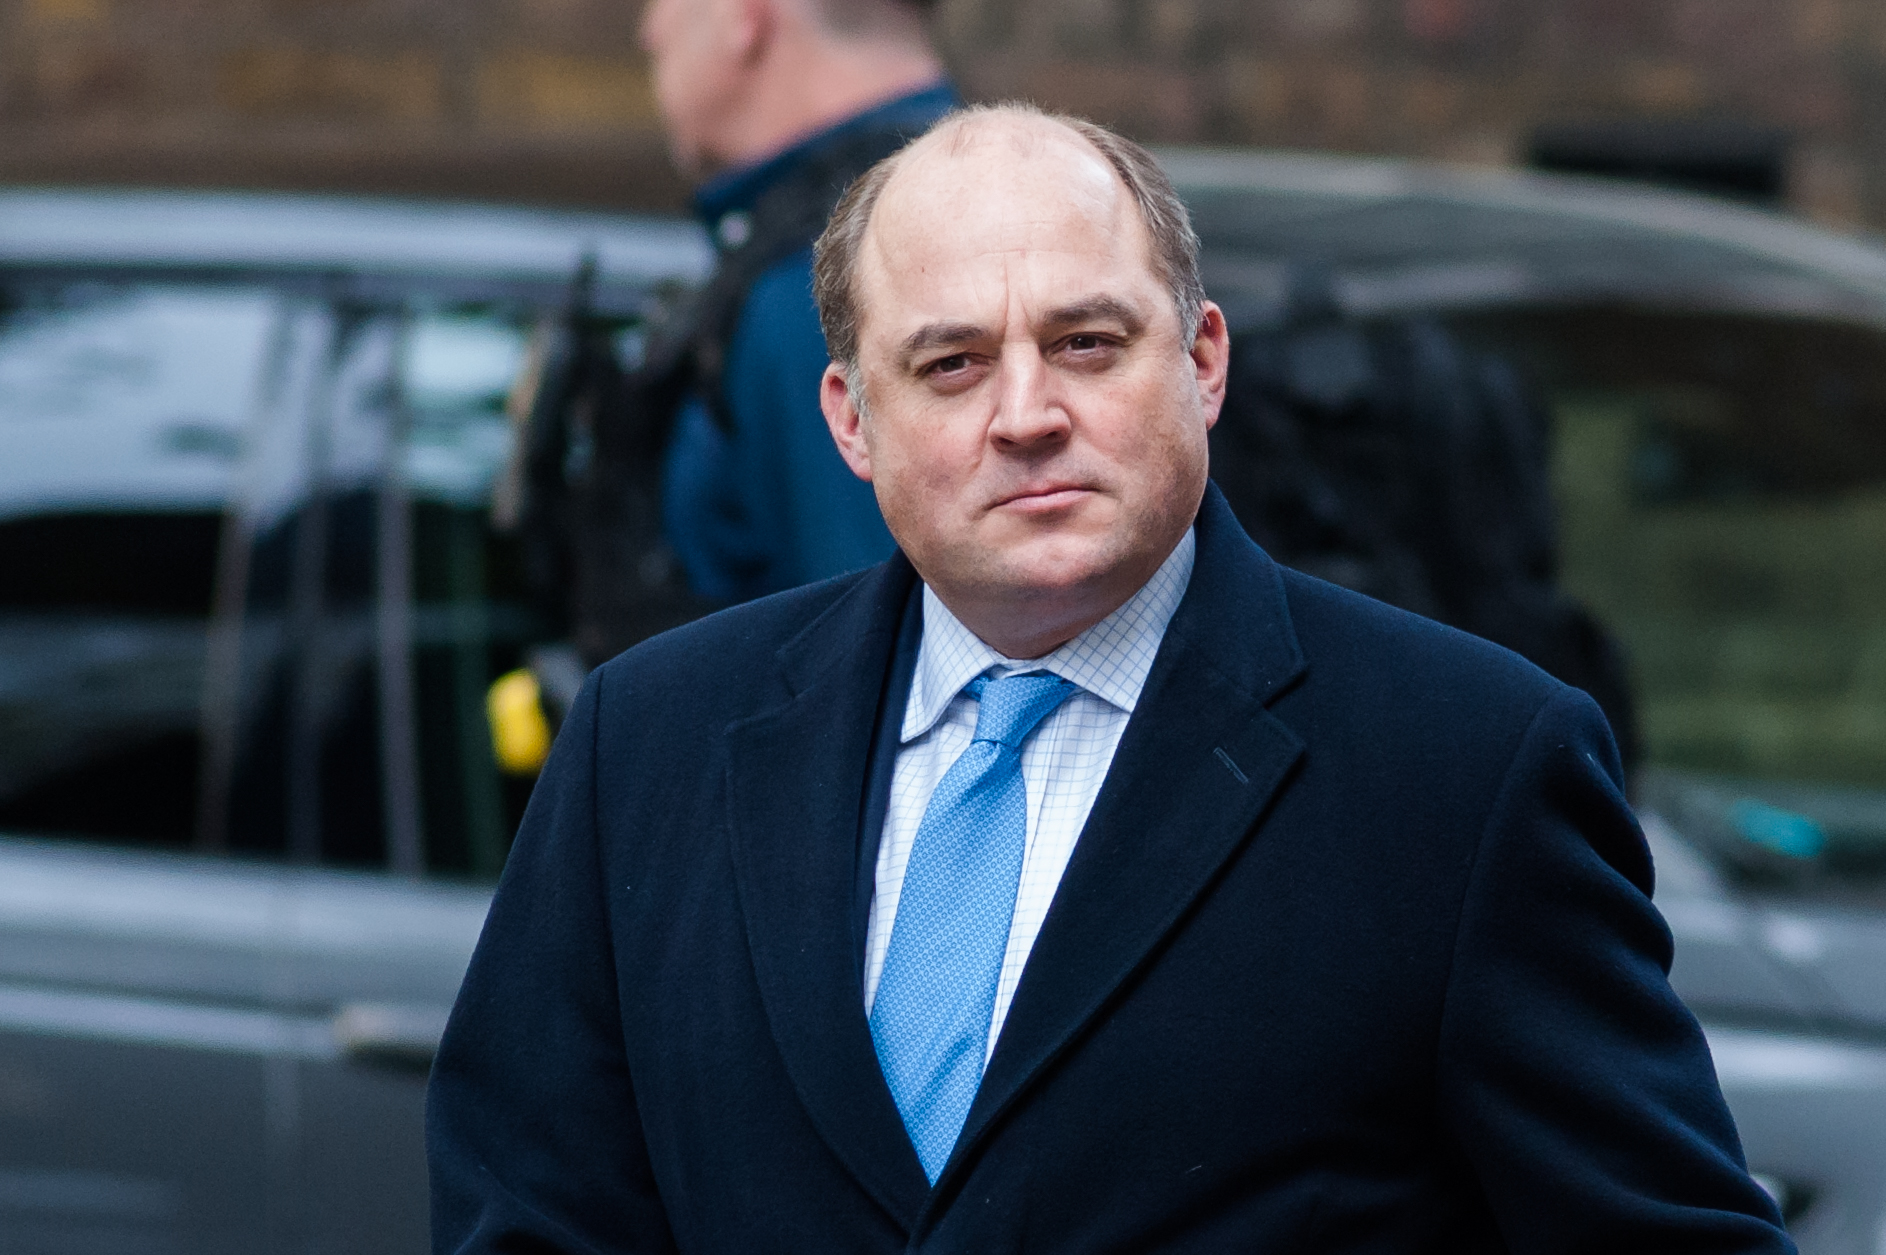 Secretary of State for Defence Ben Wallace arrives for the Cabinet meeting at 10 Downing Street on 16 October, 2019 in London, England.